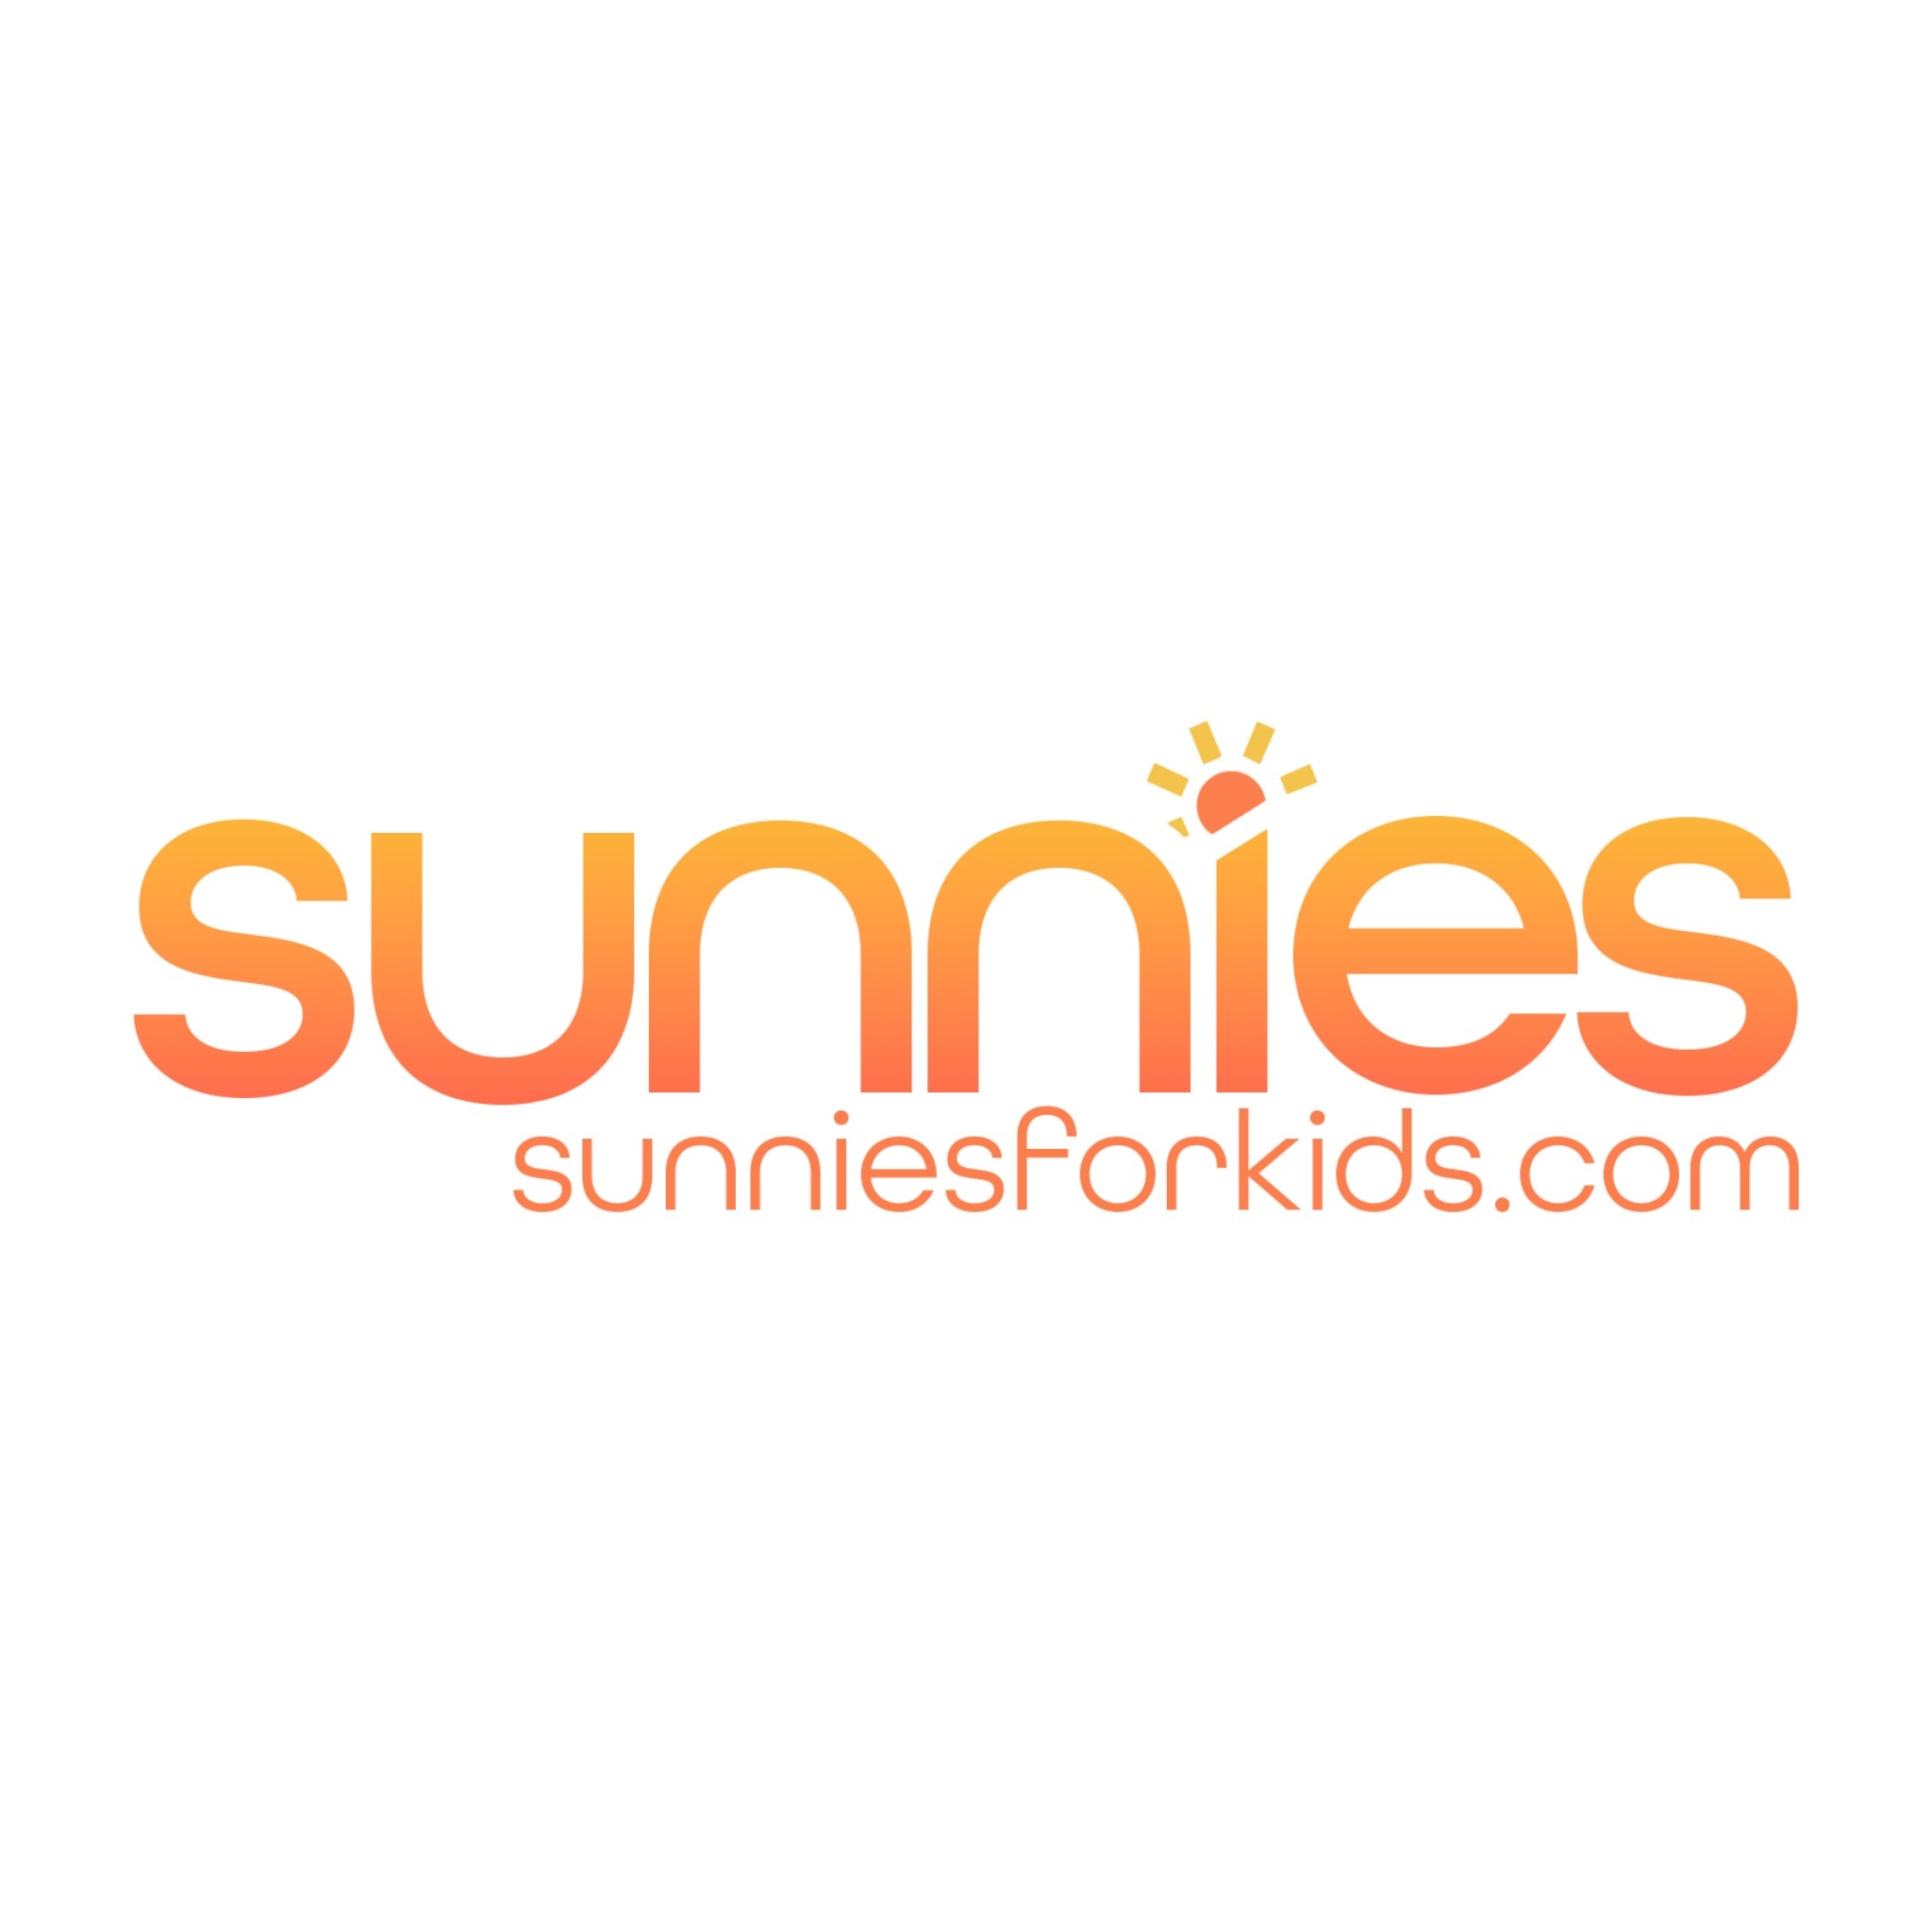 EXHIBITOR: Sunnies for Kids